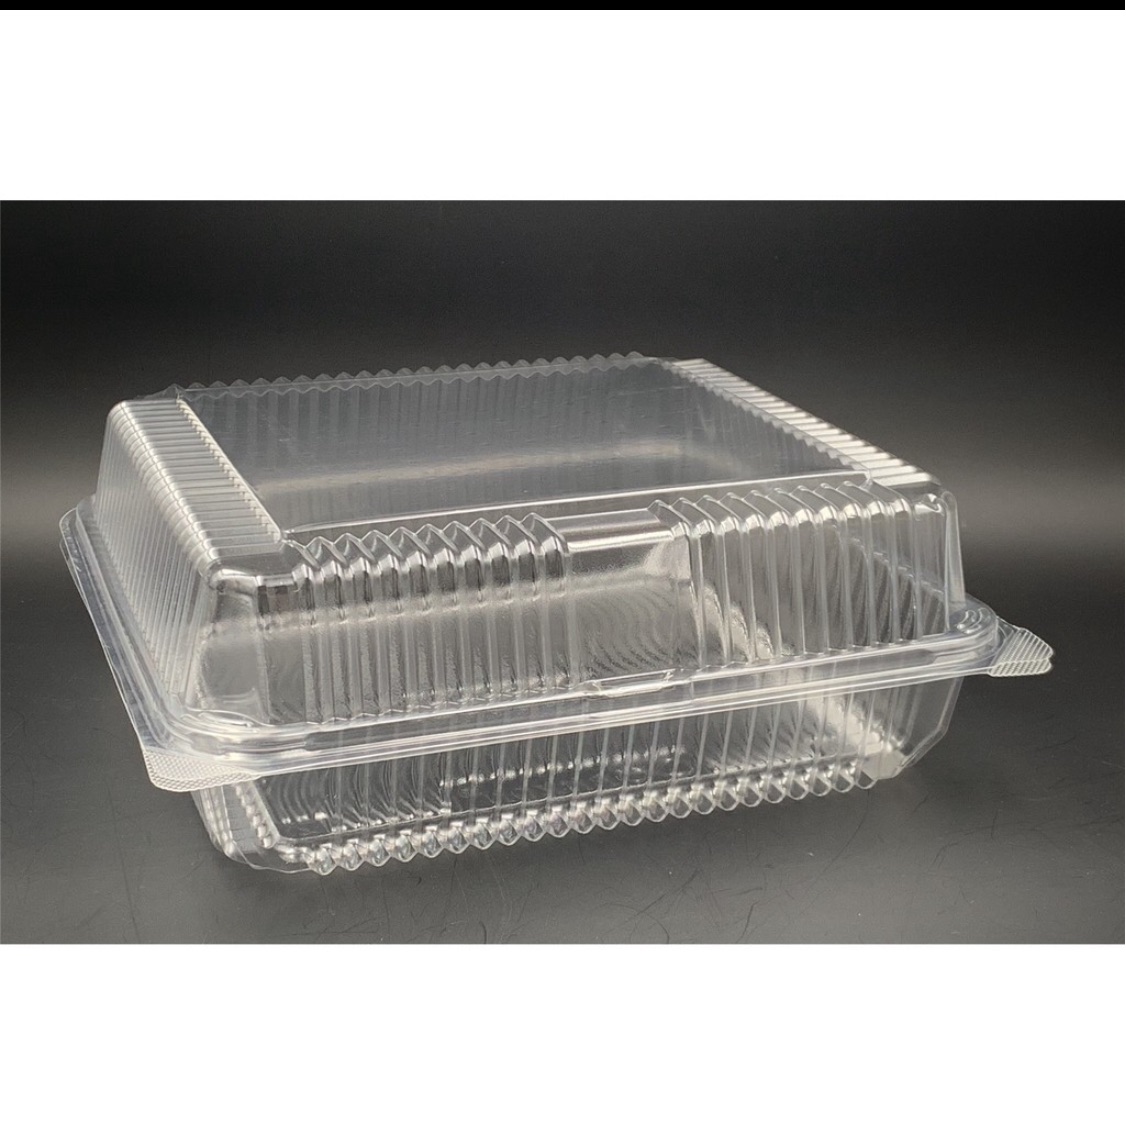 Single Portion Cake Slice Plastic Hinged Container/Box - Pack of 10